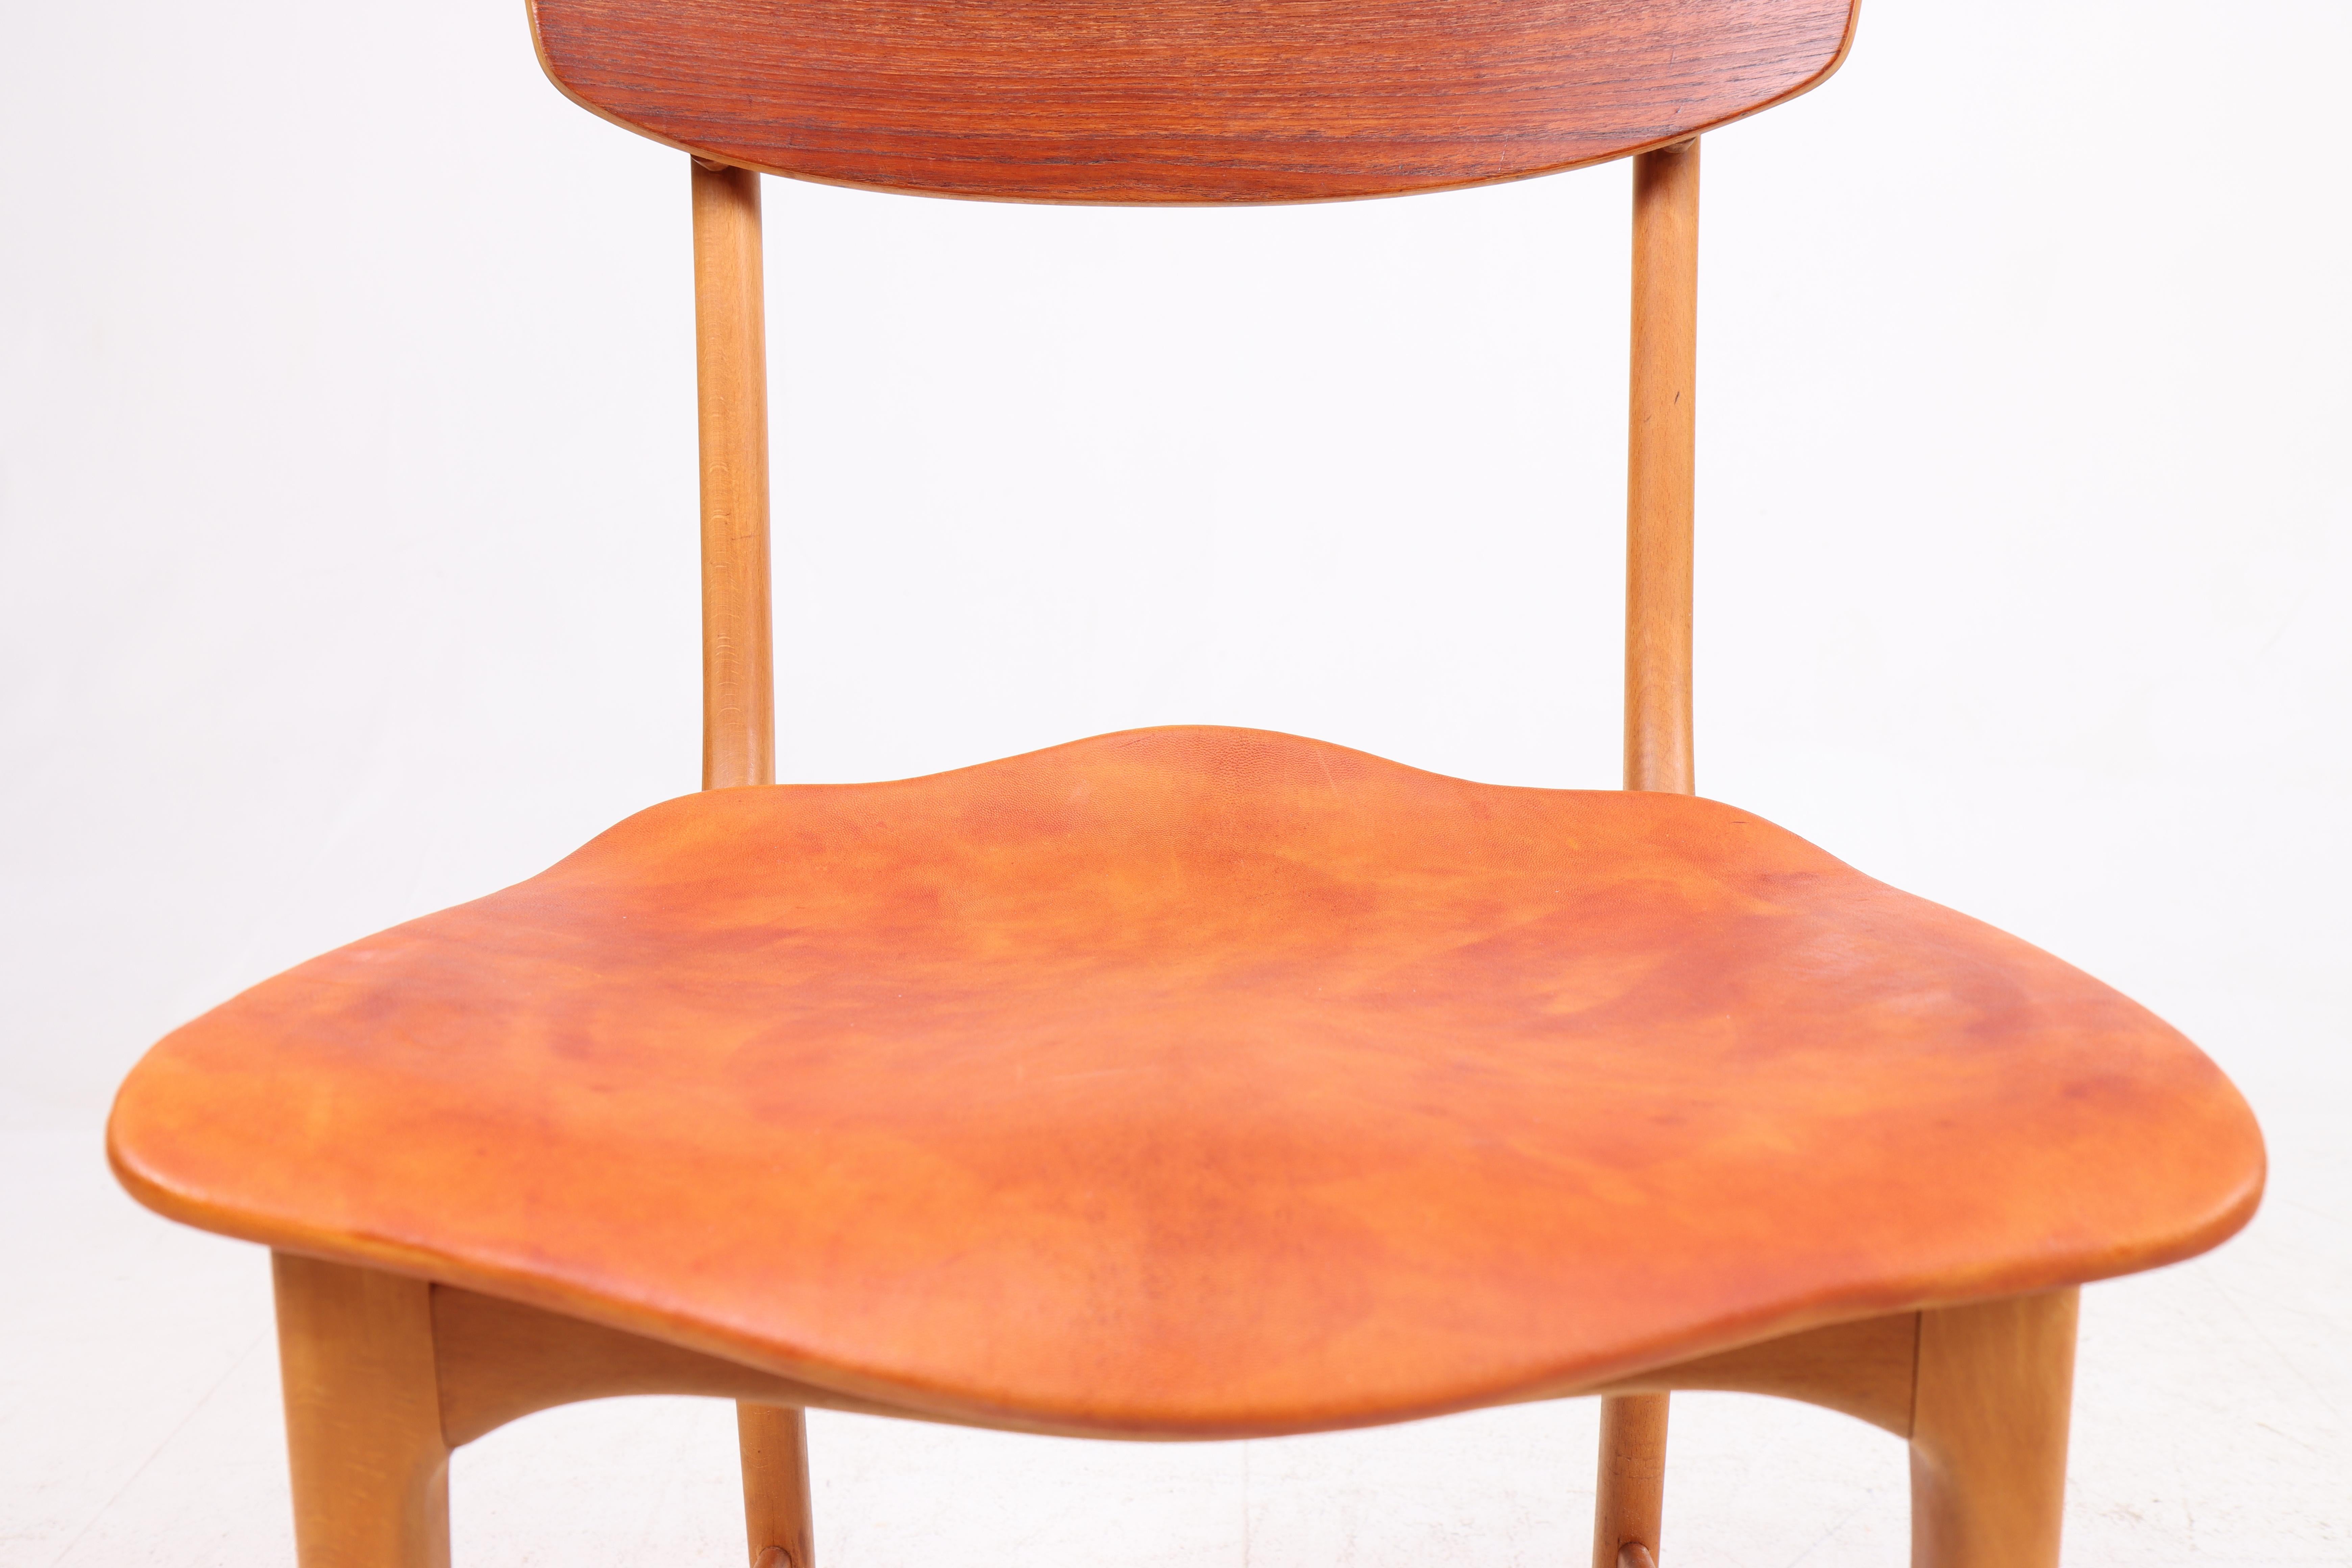 Set of Four Side Chairs in Teak and Leather, Danish Design, 1960s In Good Condition For Sale In Lejre, DK